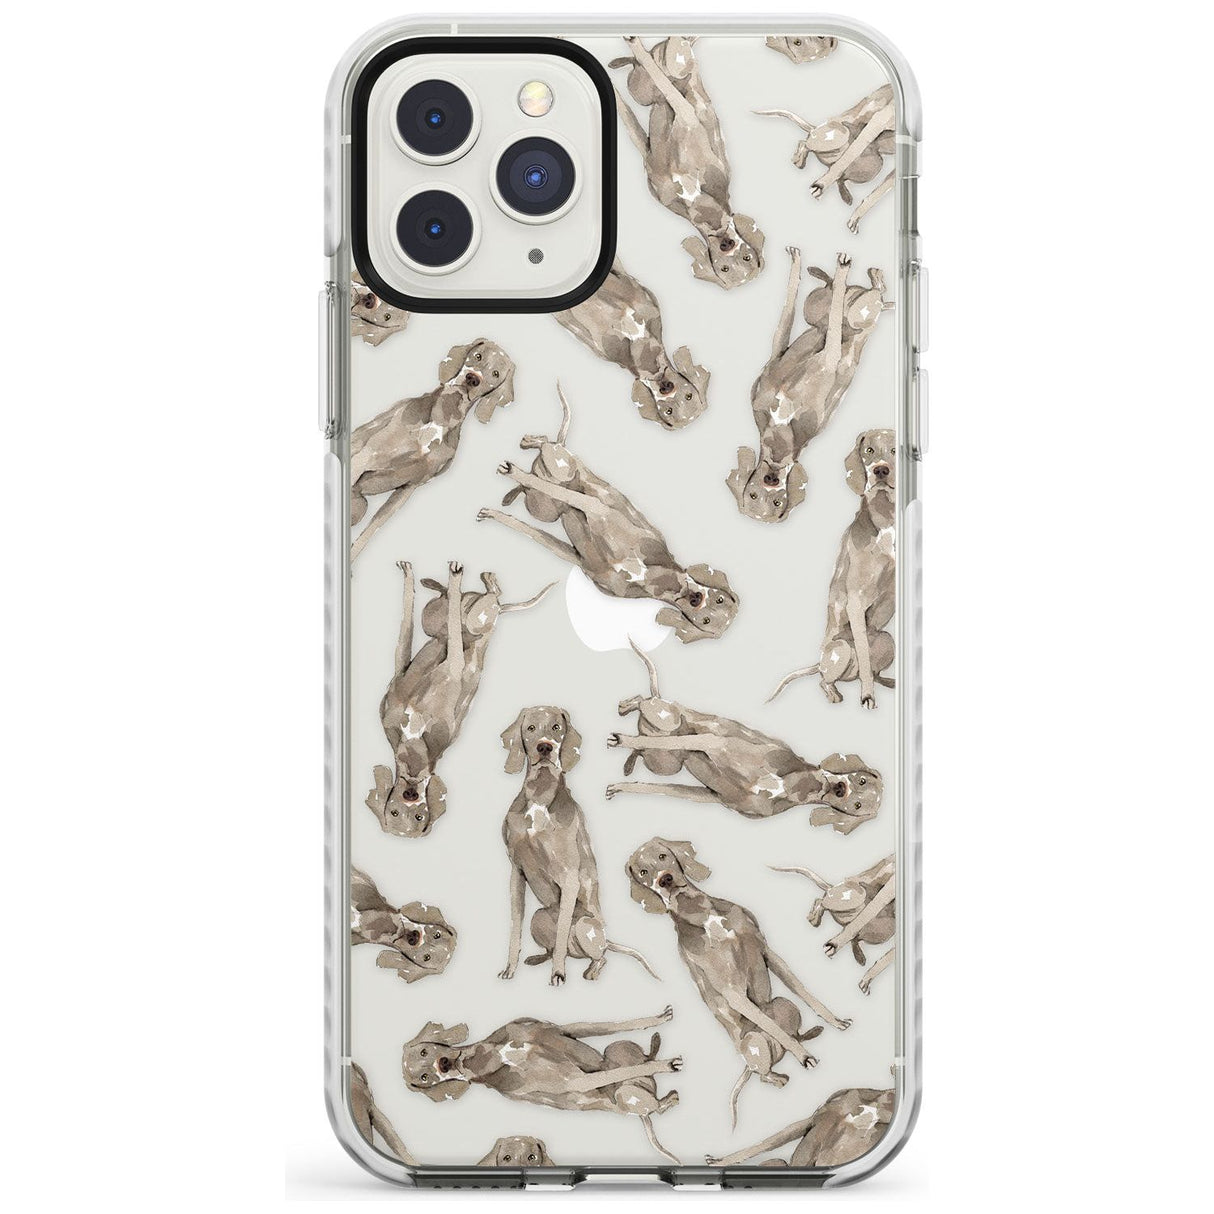 Weimaraner Watercolour Dog Pattern Impact Phone Case for iPhone 11 Pro Max